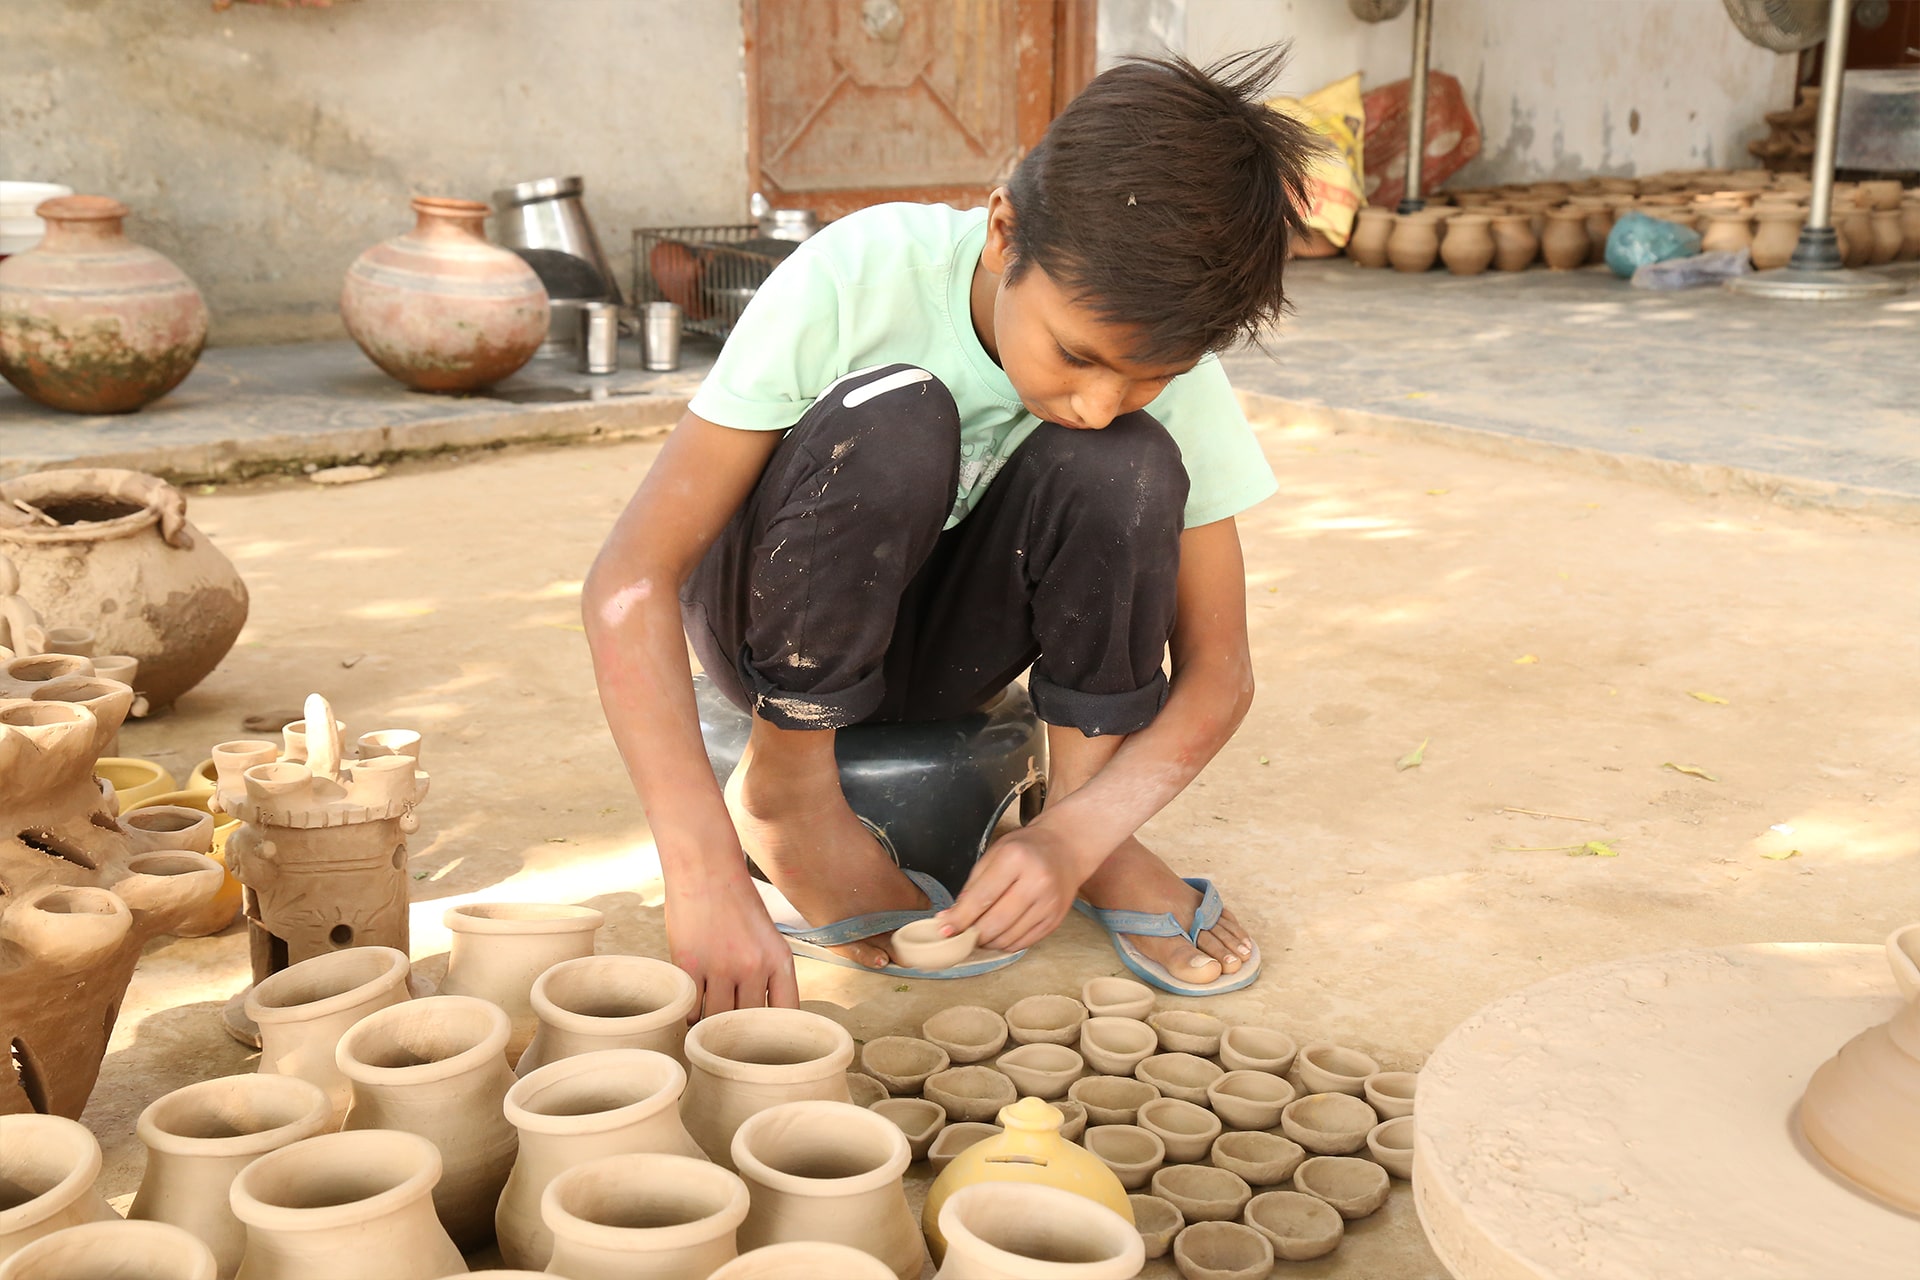 Supporting the Dream of Sameer, an Artisan